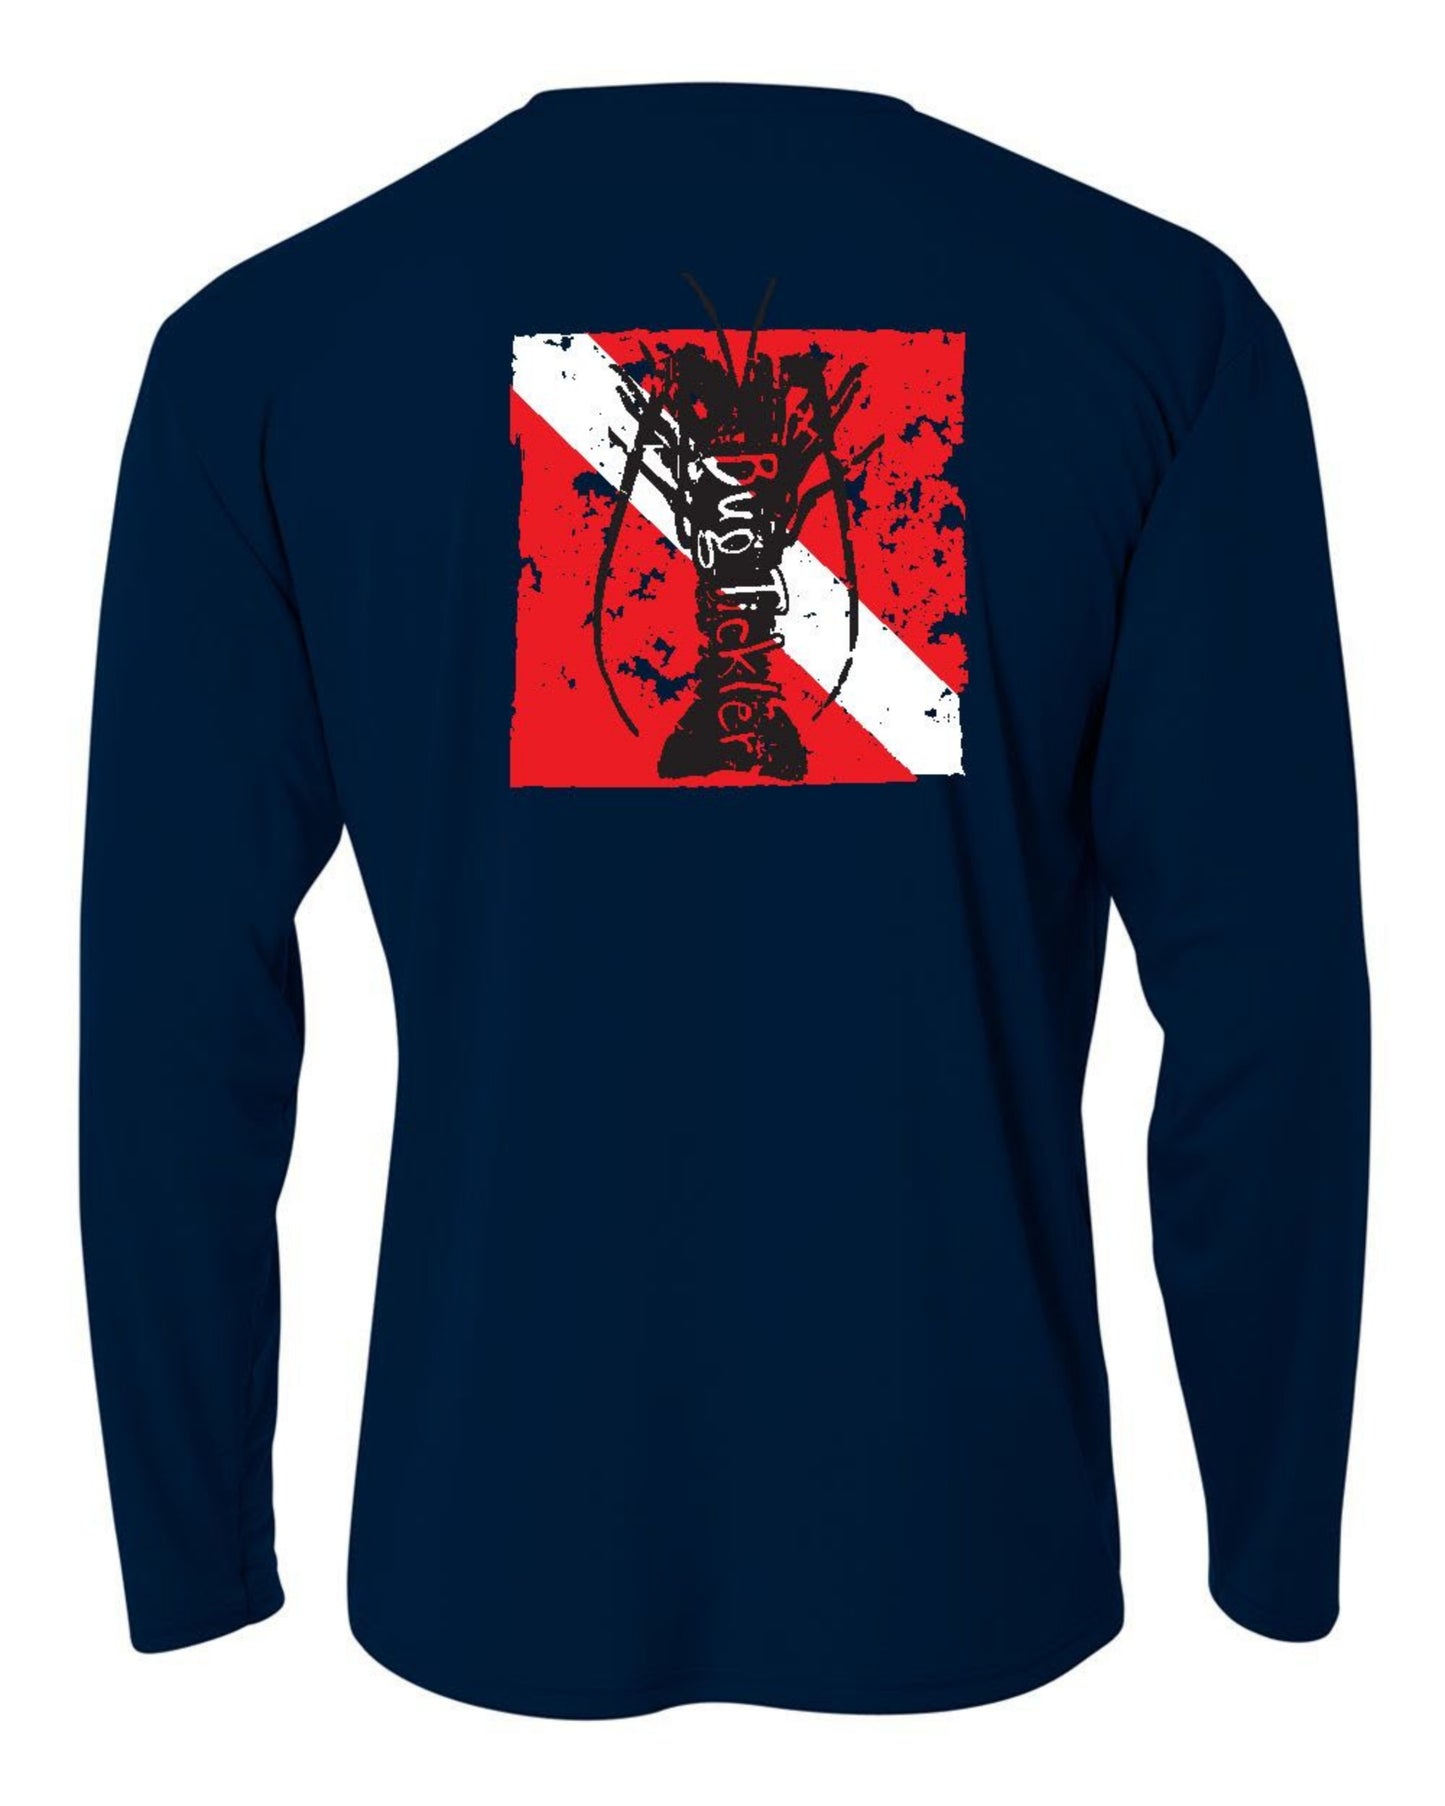 Youth Performance Fishing Shirts 50+uv Sun Protection -Reel Fishy Apparel L / Navy Crab L/S - Red/White Logo